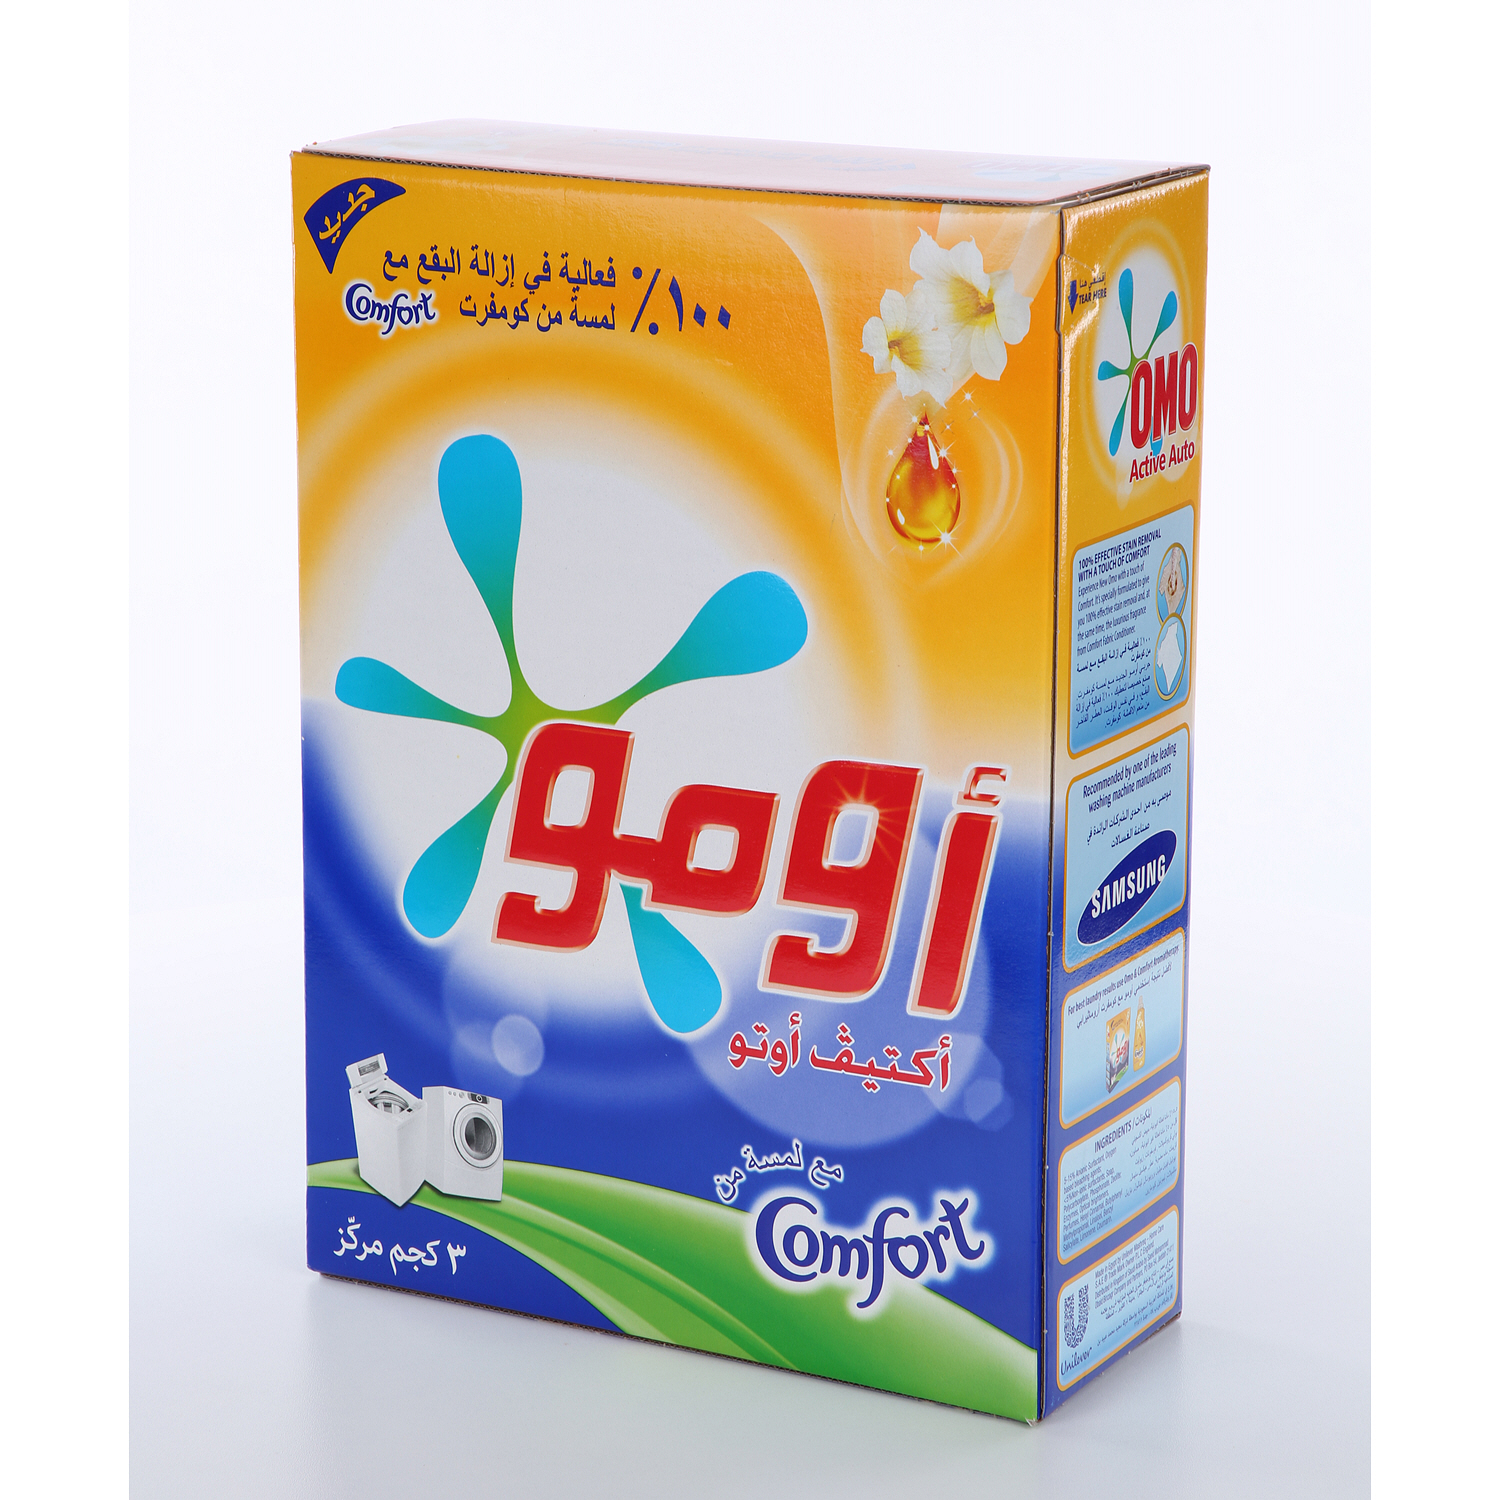 Omo Active Auto Detergent With A Touch Of Comfort 3 Kg